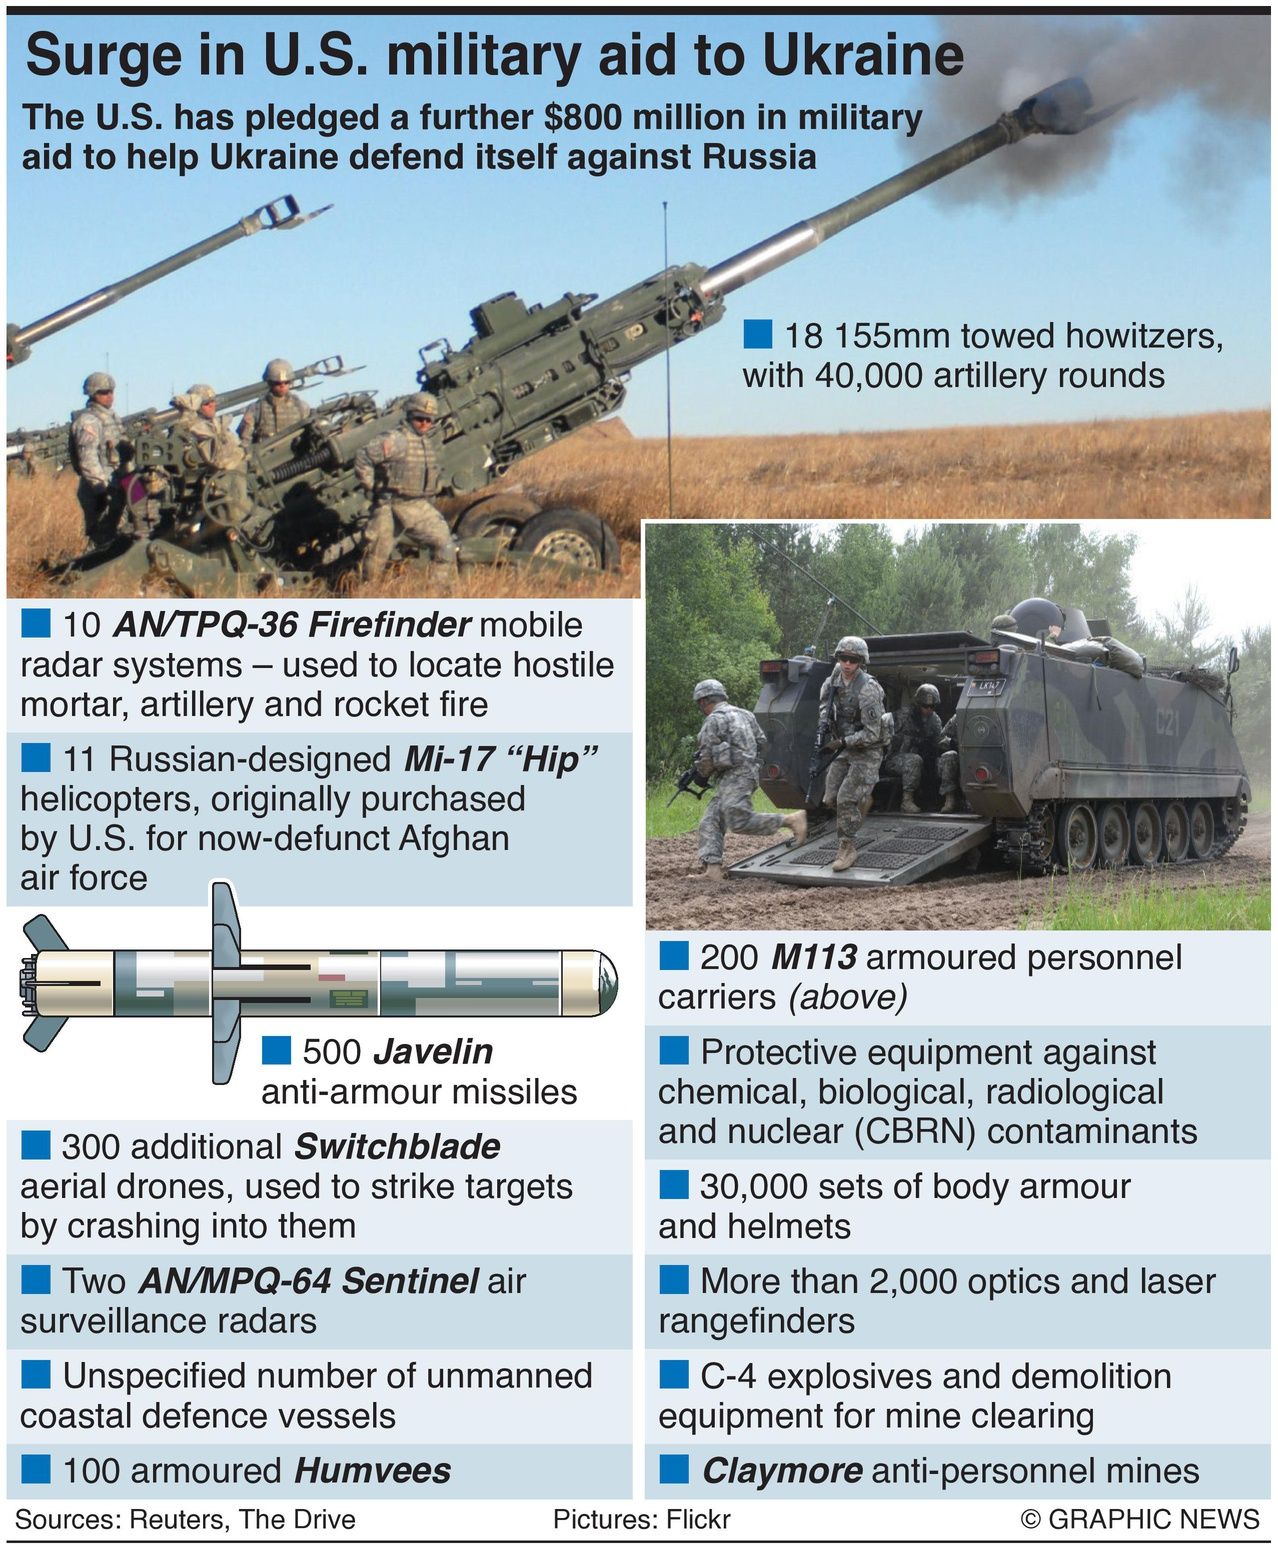 Surge in military aid to Ukraine, license from Graphic News